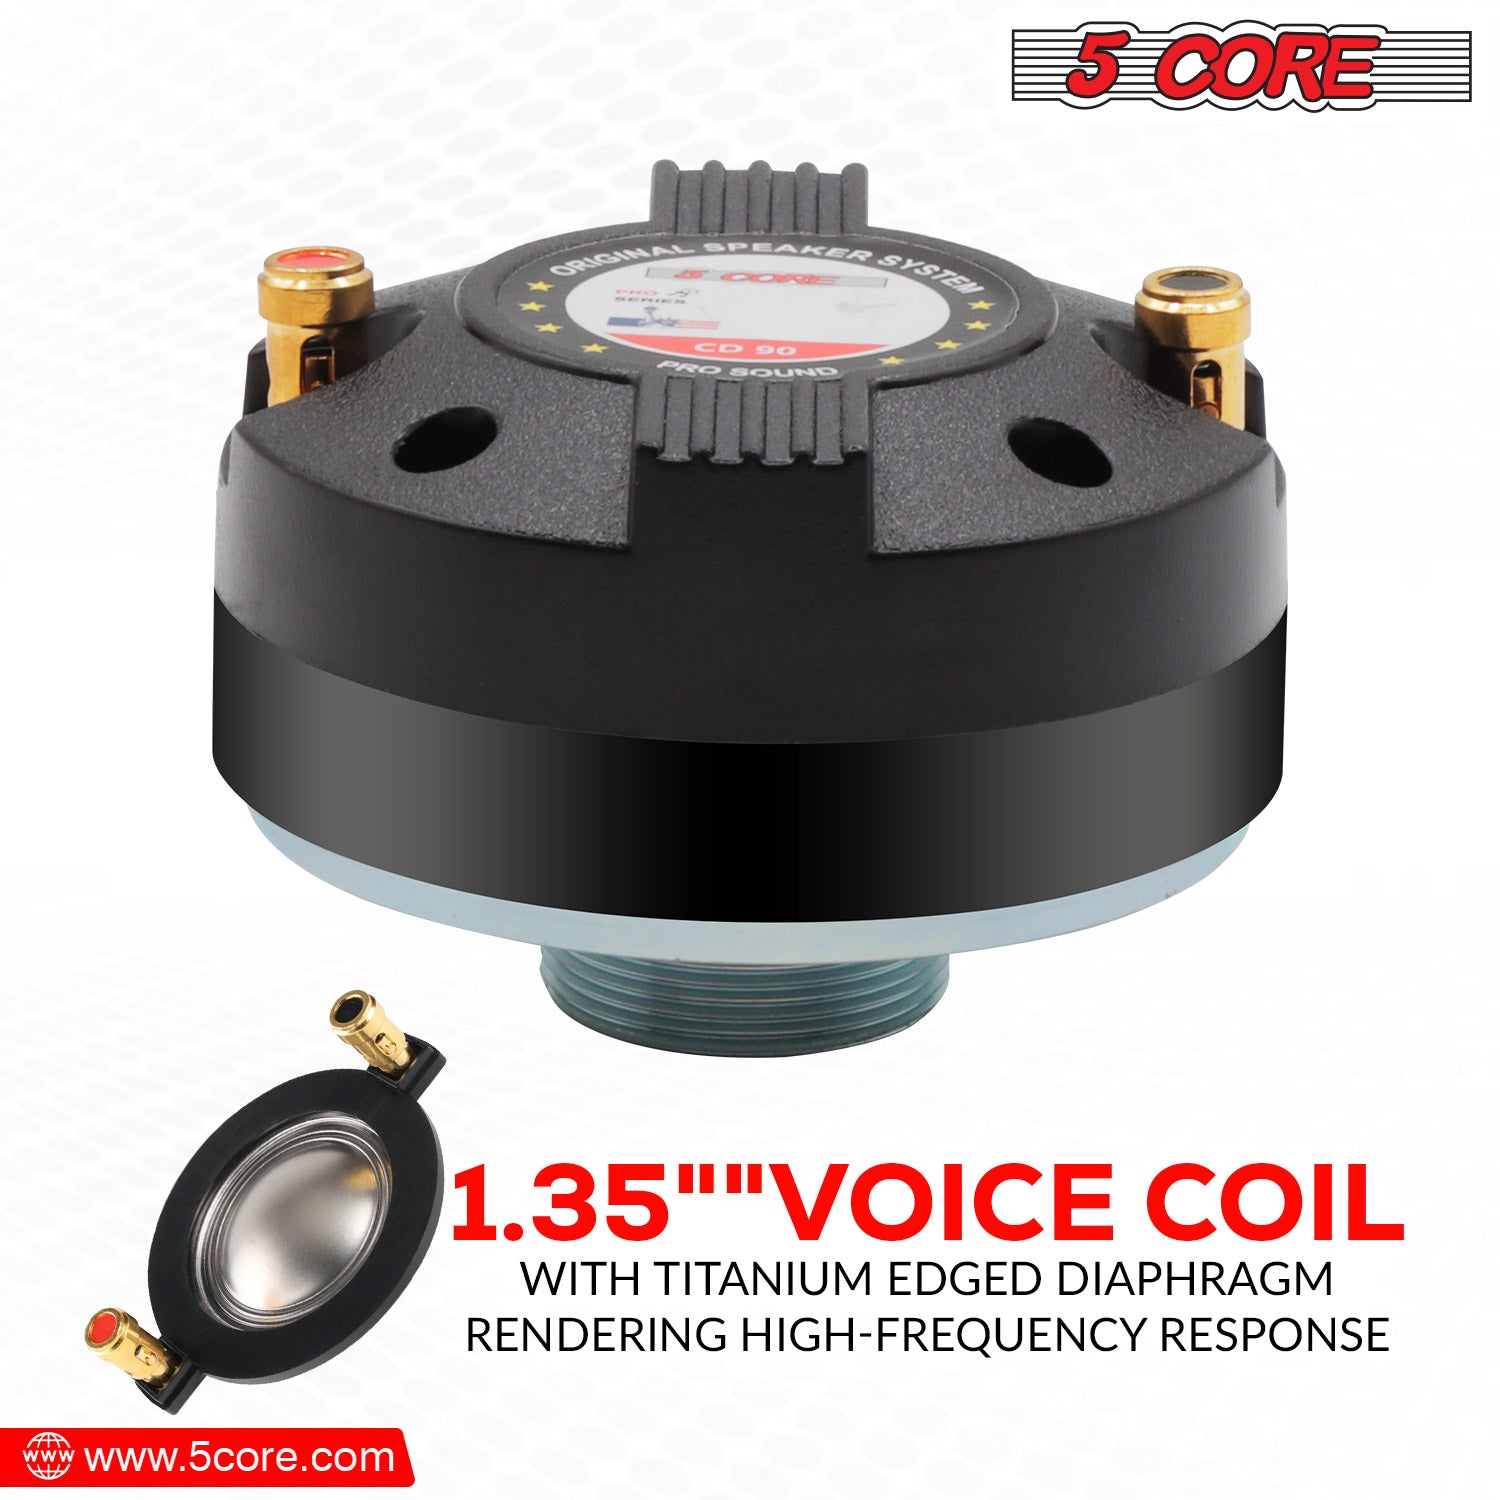 High performance tweeter 1.35" voice coil with titanium edged diaphragm rendering high-frequency response.